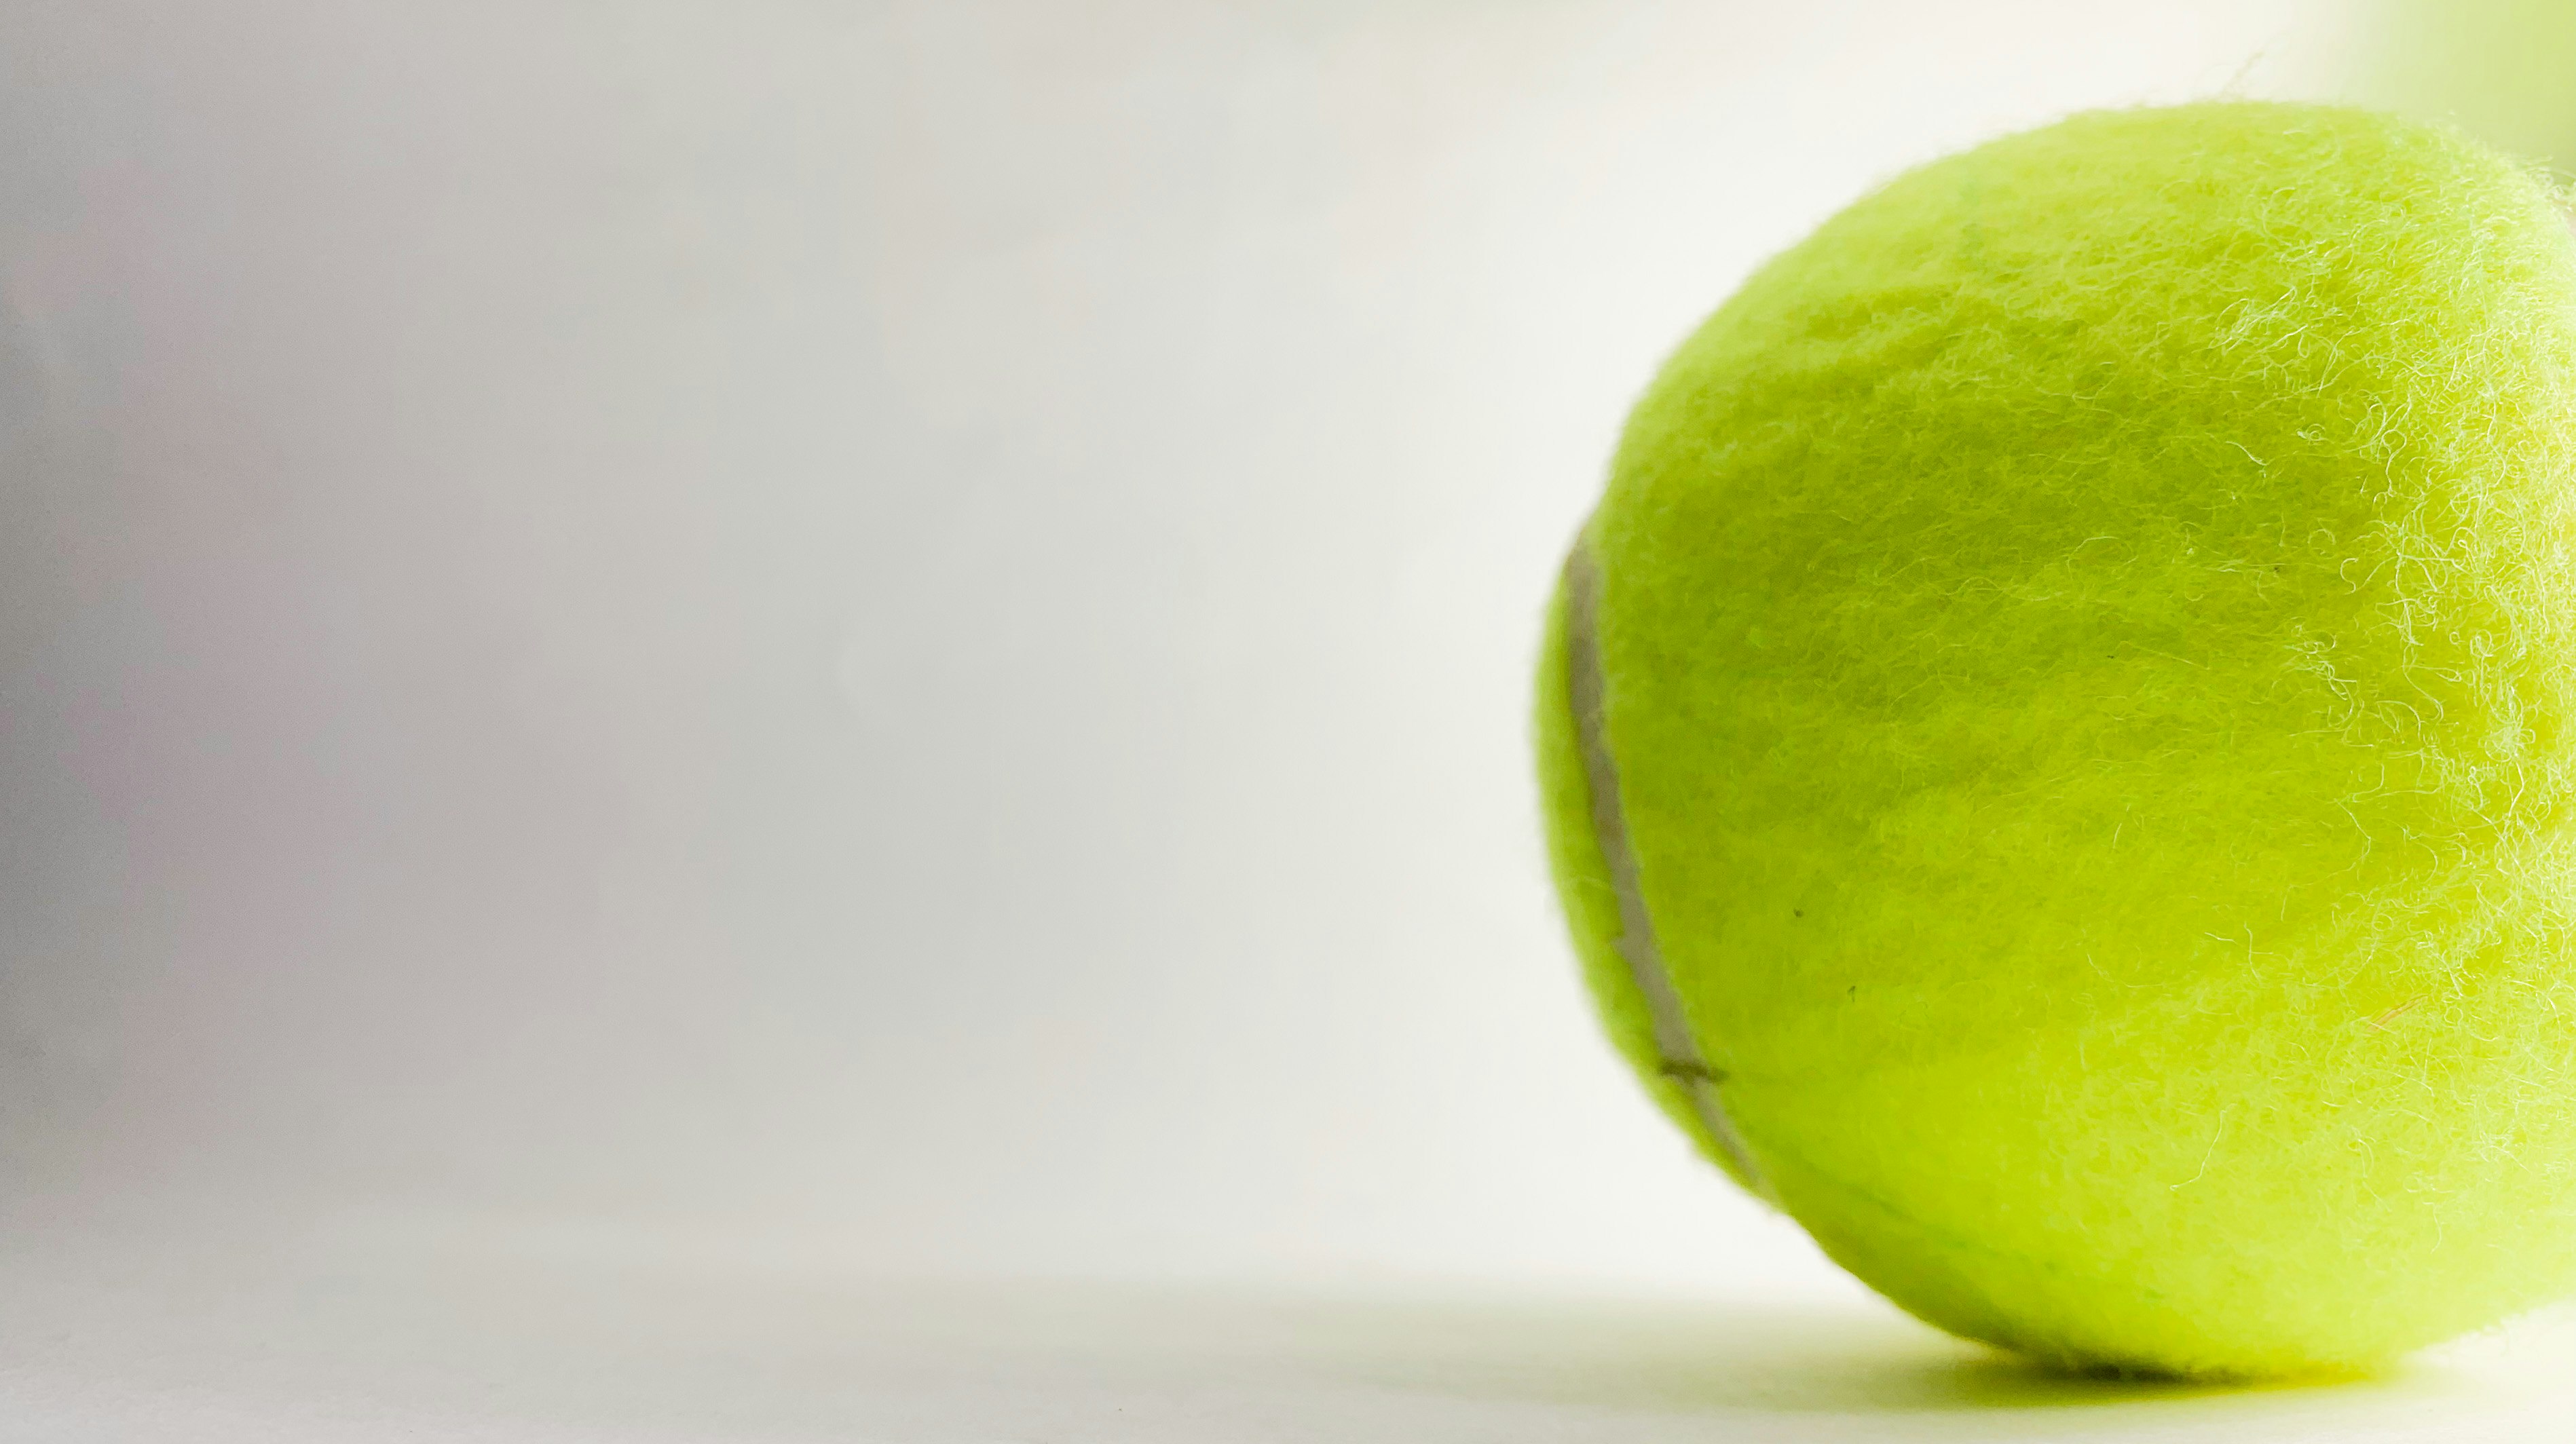 green tennis ball on white surface